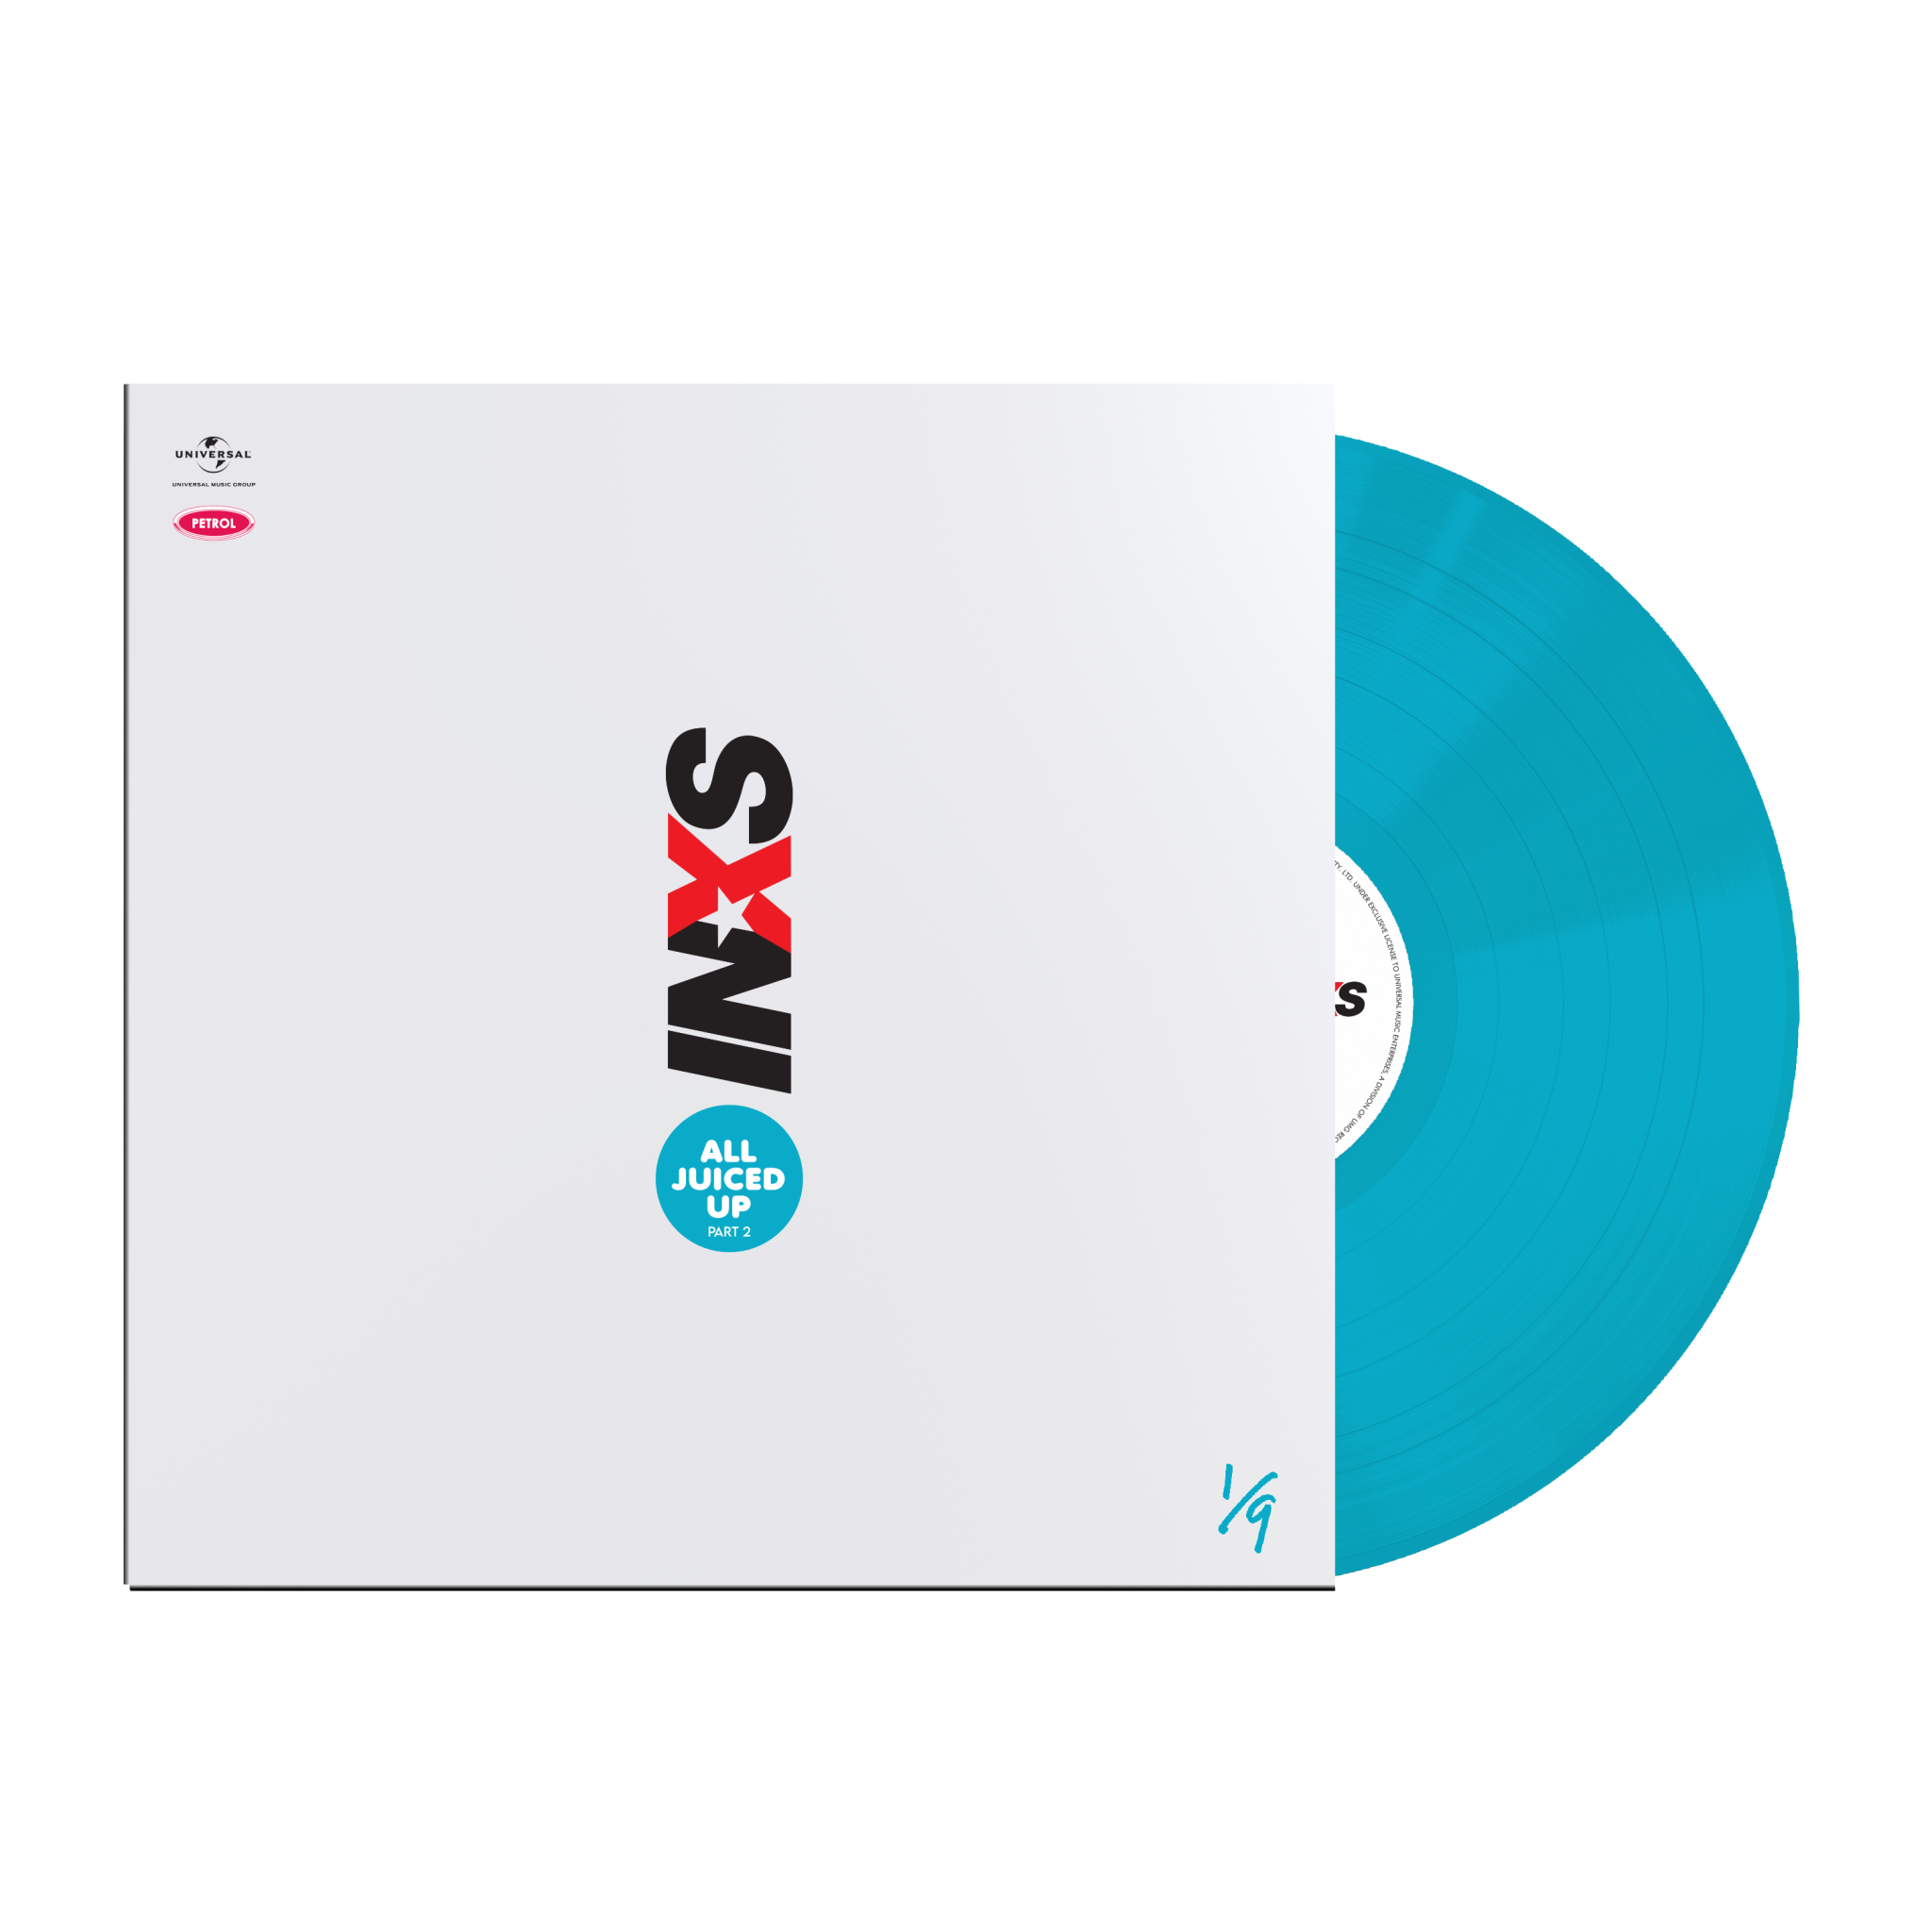 INXS - ALL JUICED UP PART TWO – 1 of 9: Exclusive Blue Vinyl LP